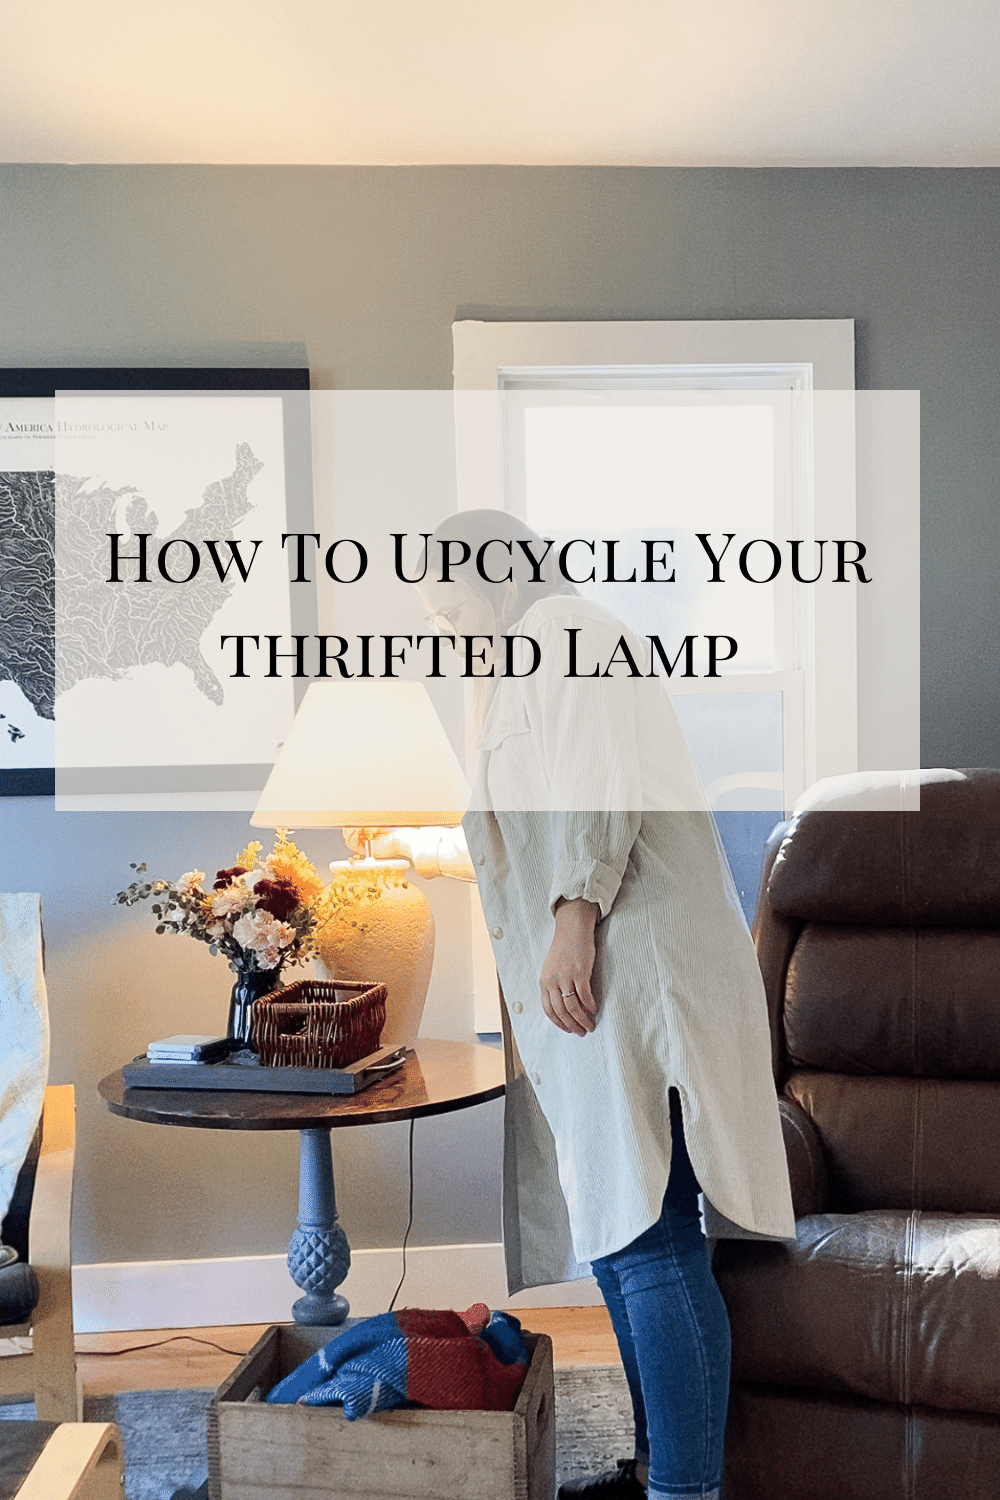 How To Upcycle Your Thrifted Lamp